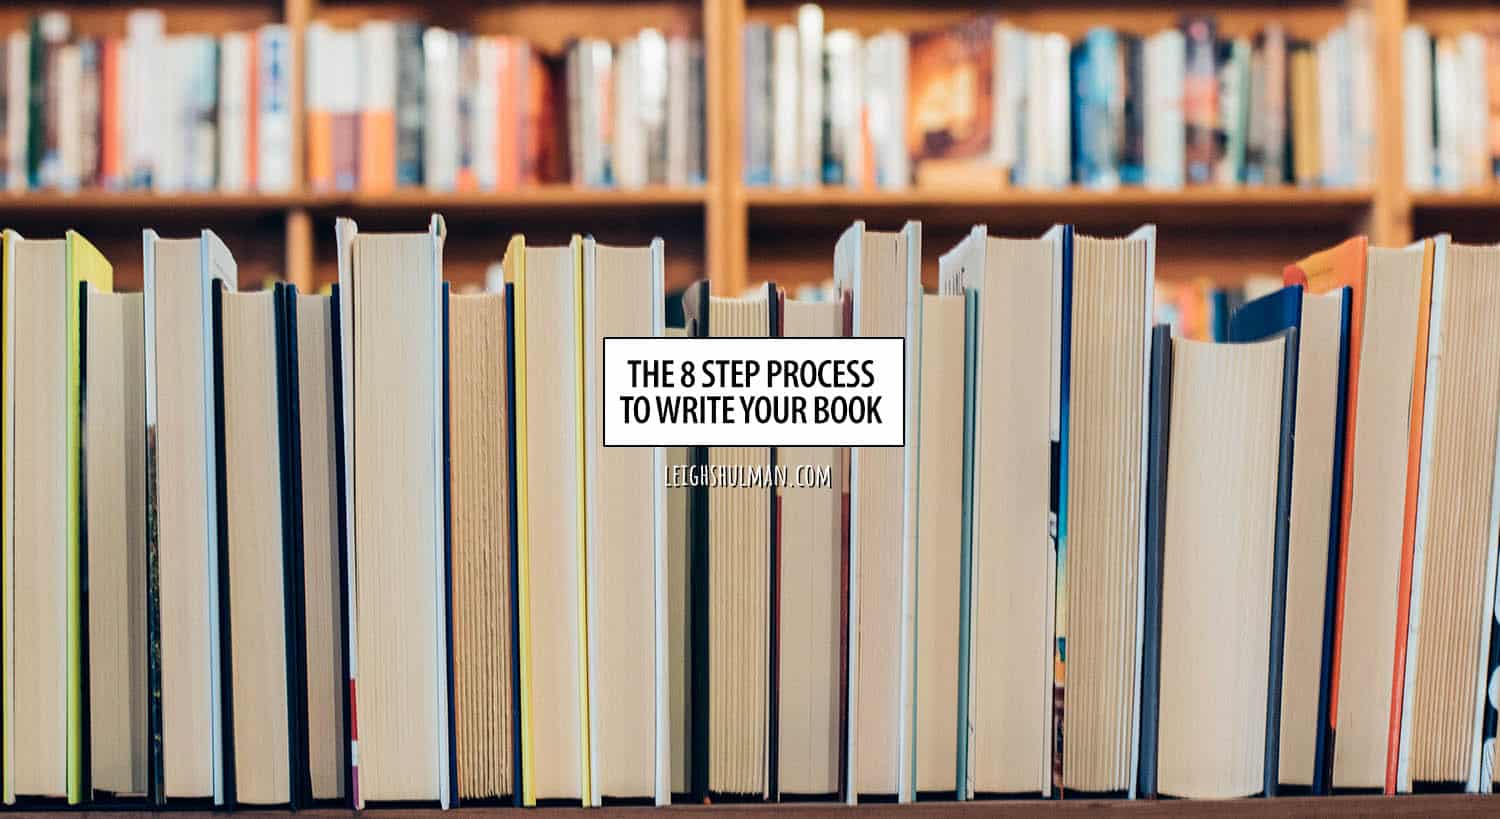 How to write a book in 8 simple steps